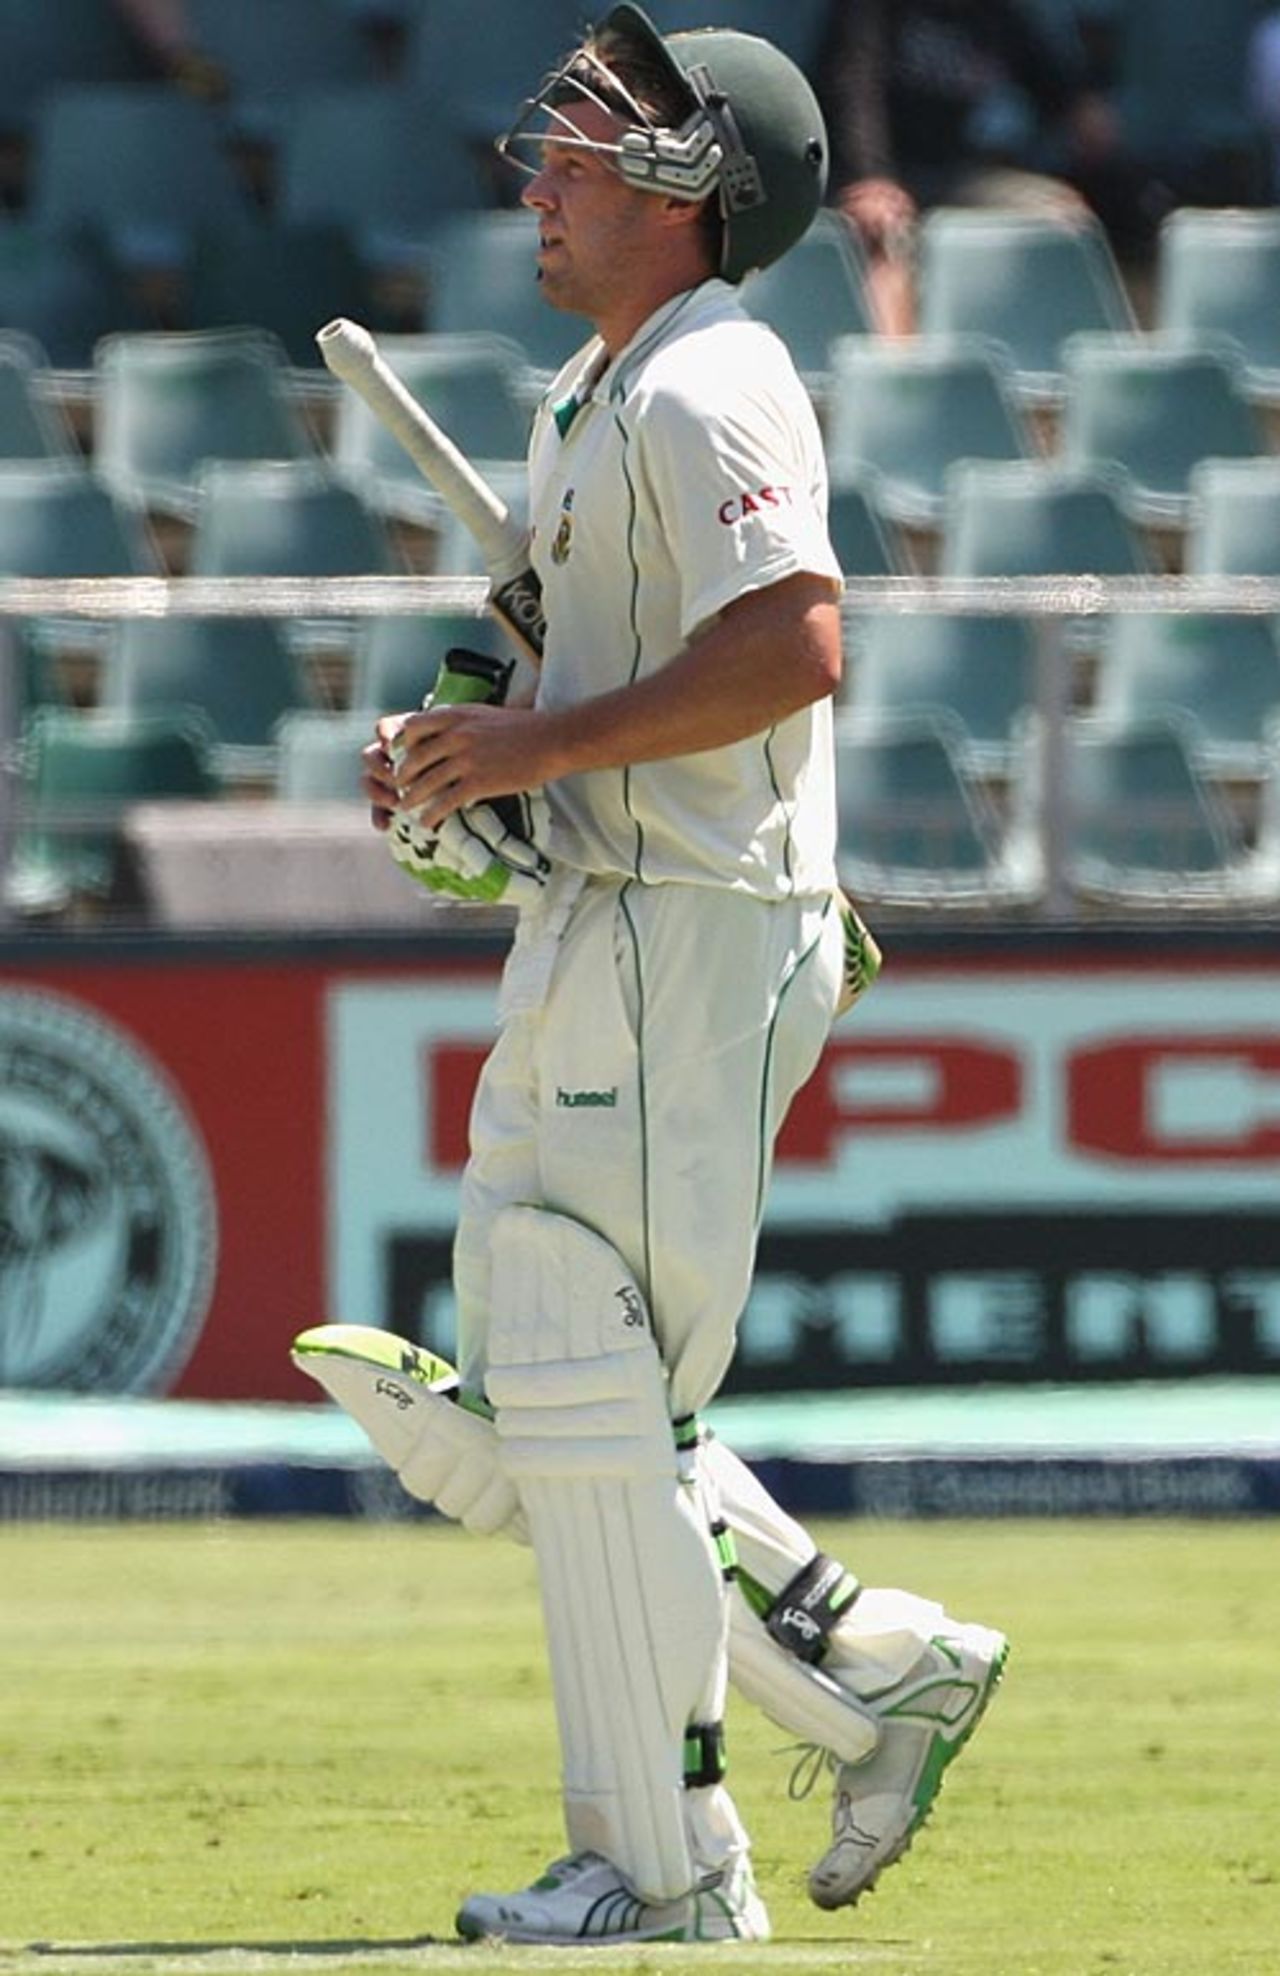 AB de Villiers walks back after an unsuccessful referral, South Africa v Australia, 1st Test, Johannesburg, 5th day, March 2, 2009